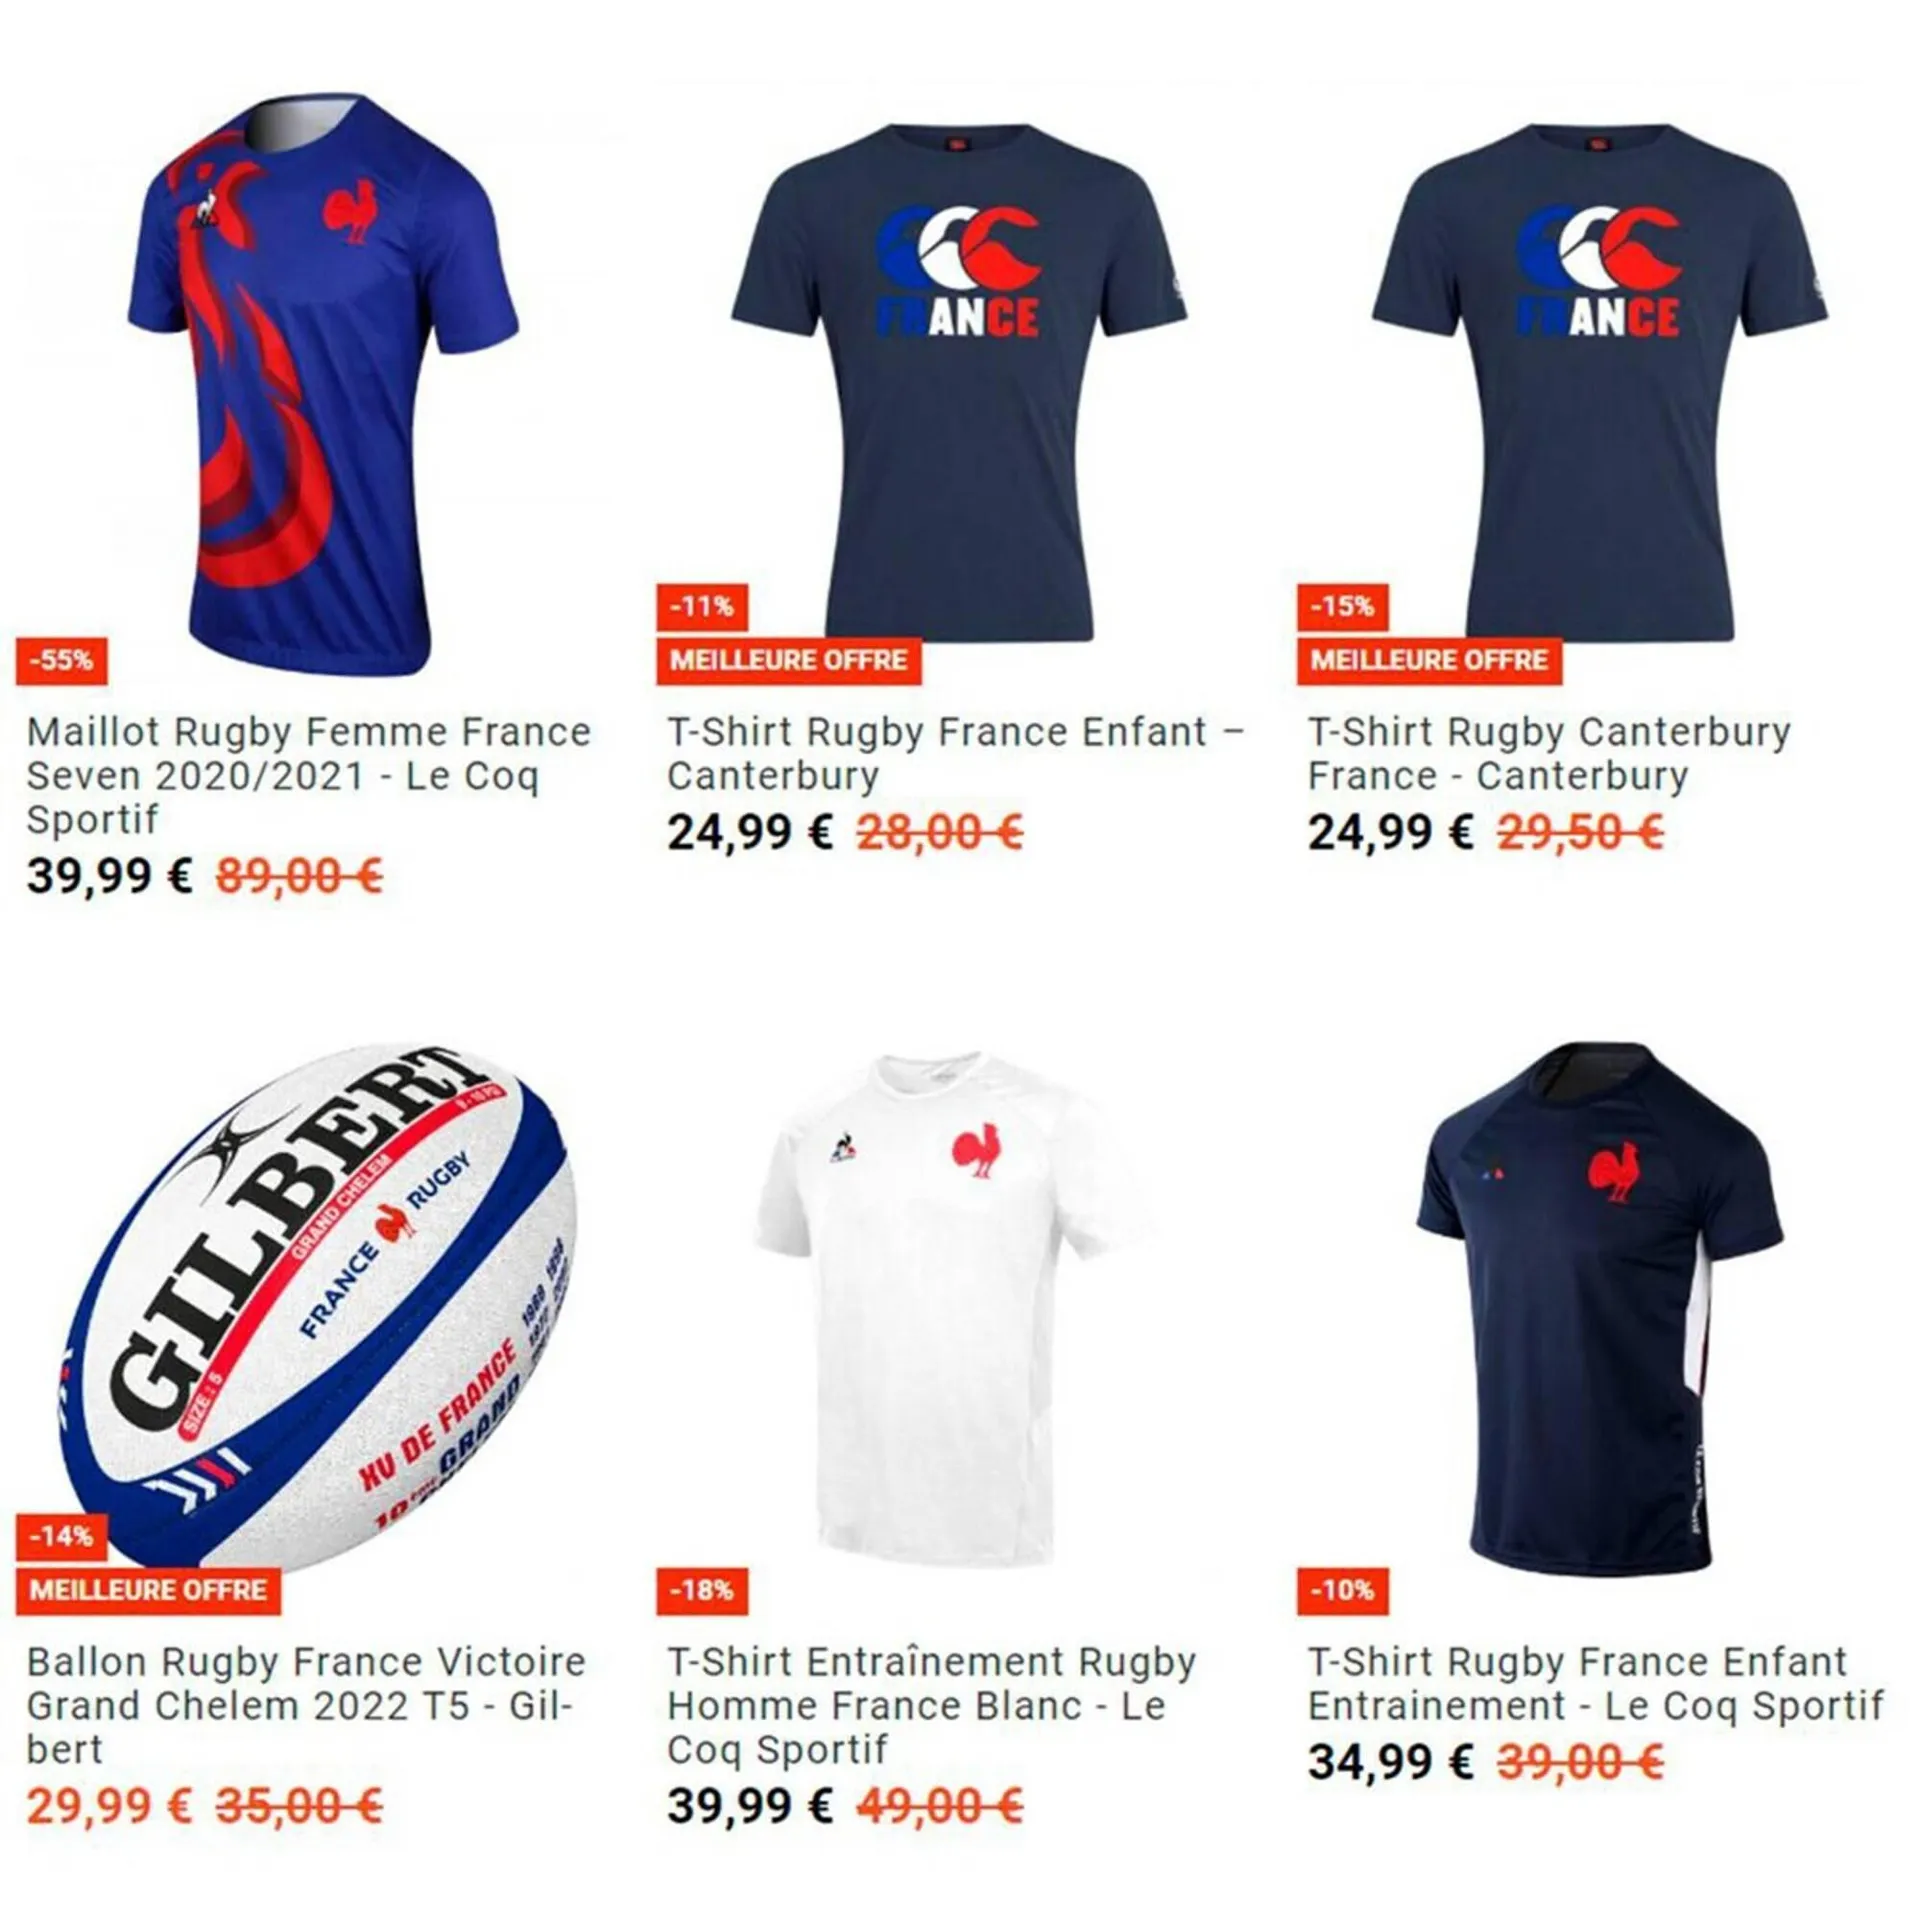 Catalogue Boutique Rugby - 2